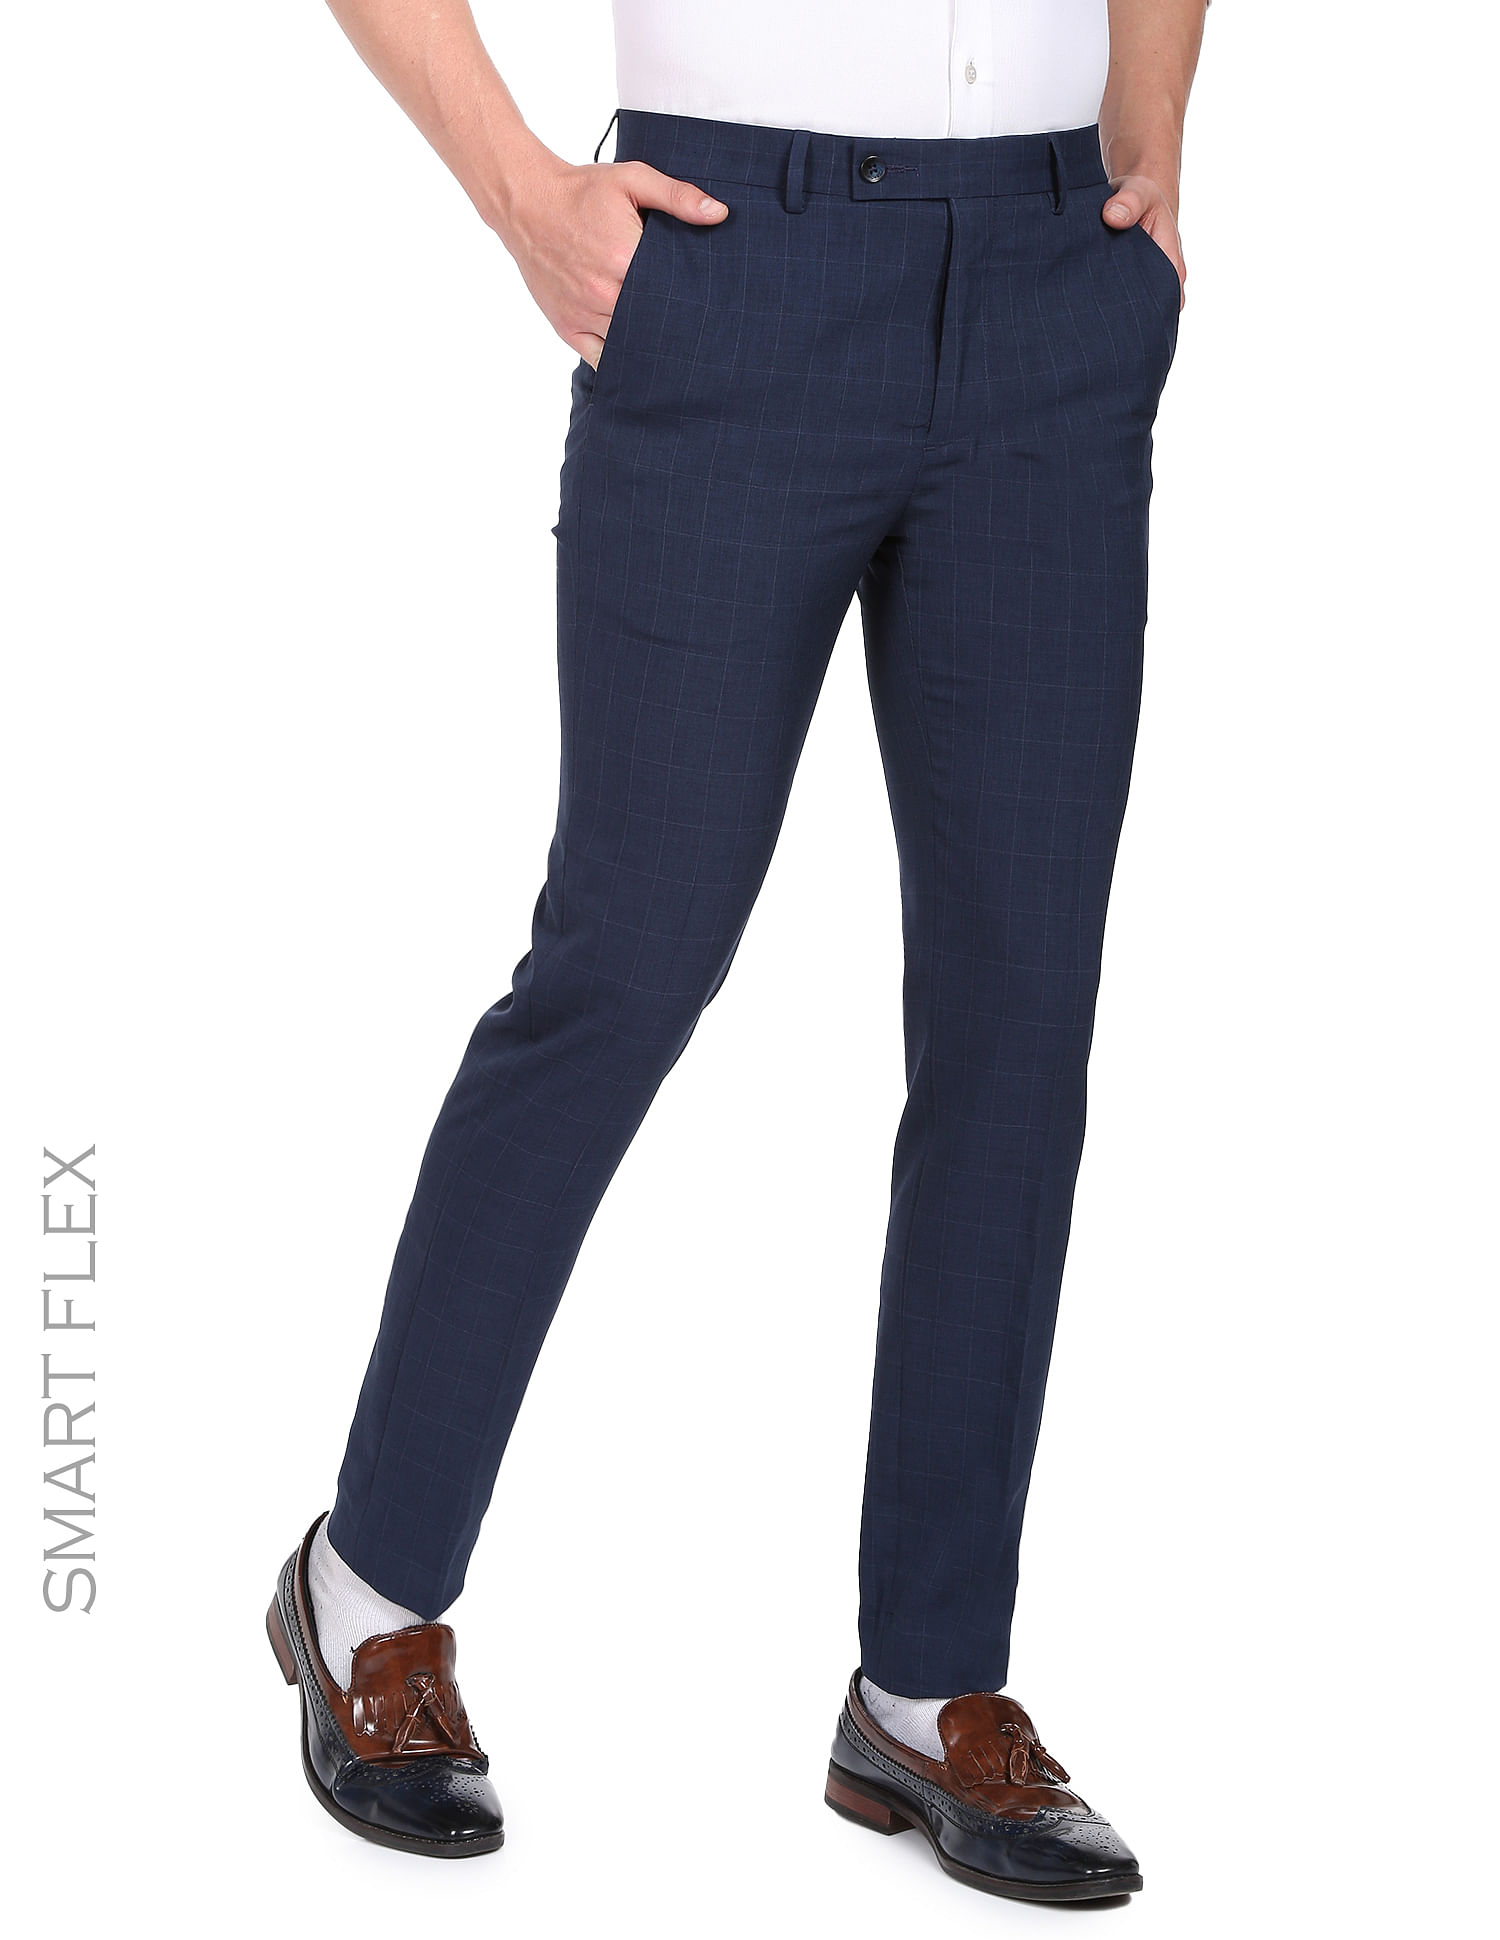 NEW MEN'S FLAT FRONT SLIM FIT NAVY TROUSERS M&S COLLECTION 30